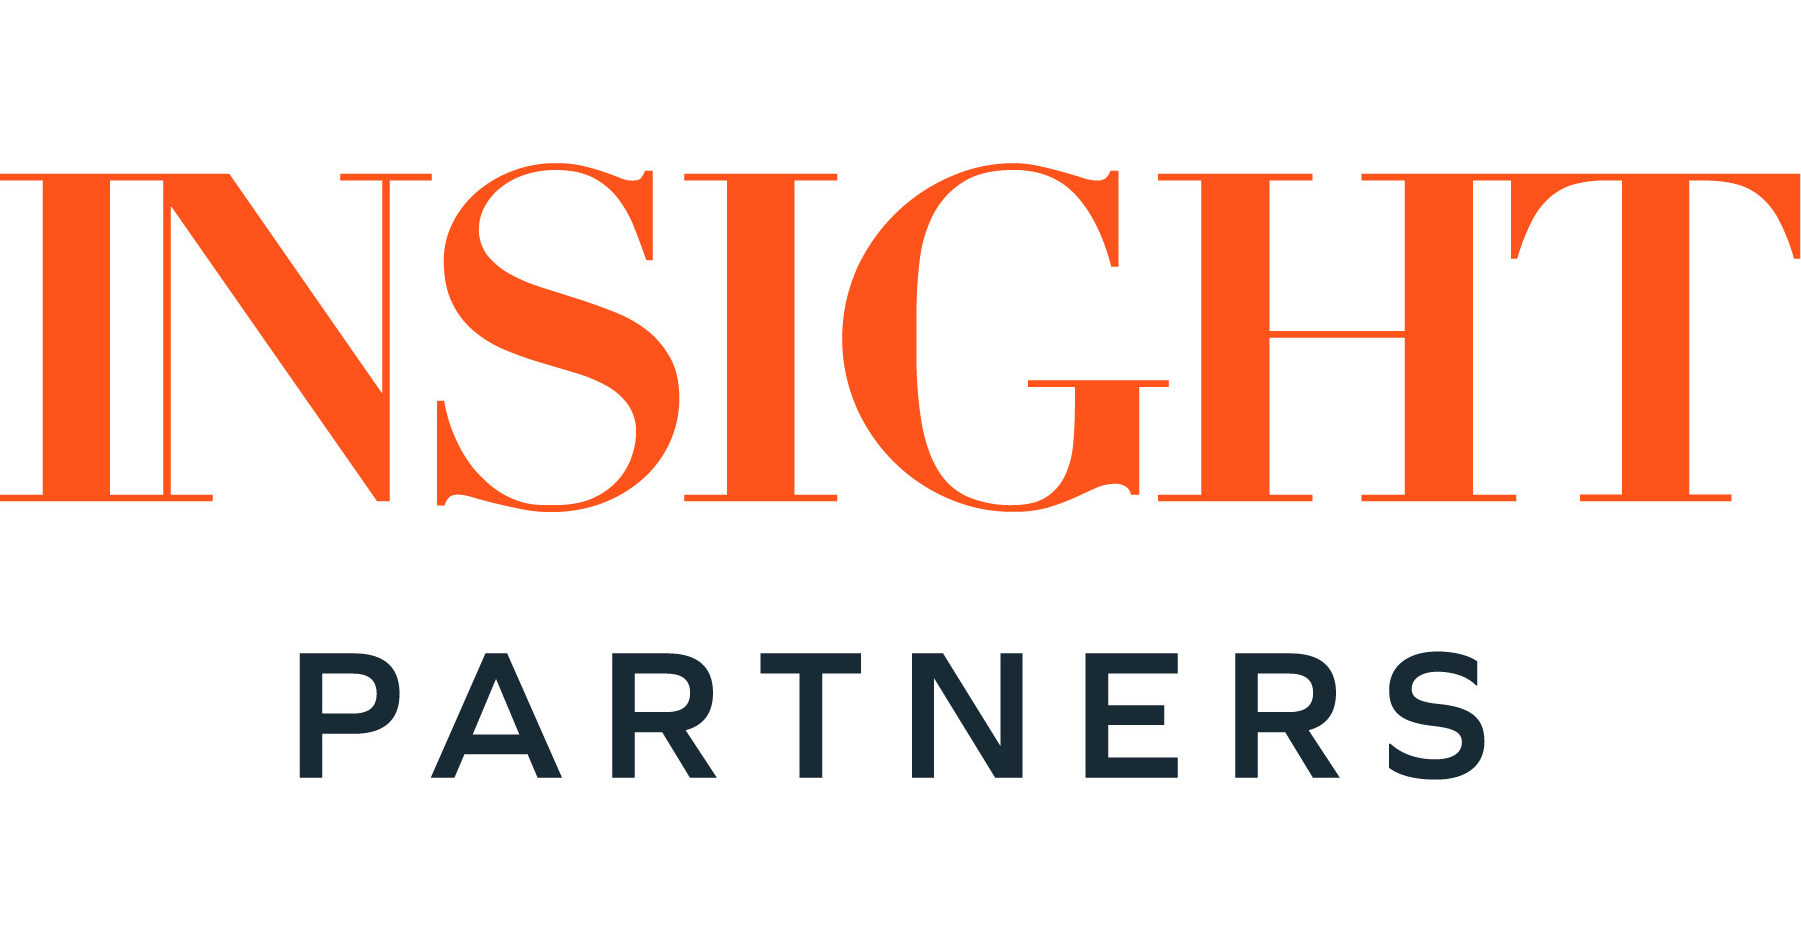 World Software program Trader Insight Companions Announces Completion of $20 Billion+ Fundraise